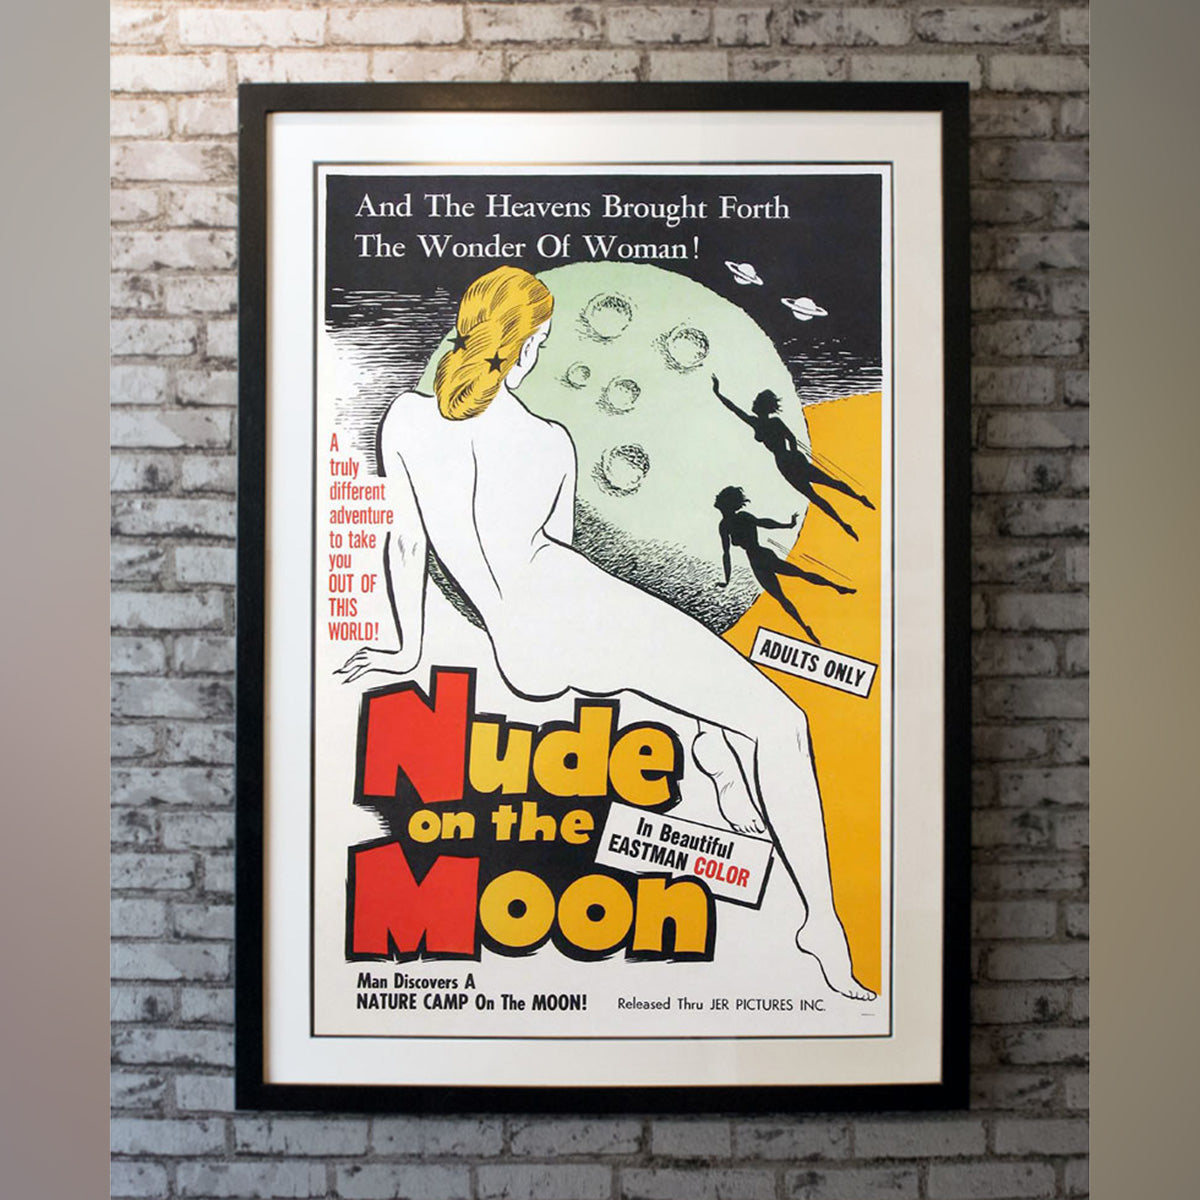 Original Movie Poster of Nude On The Moon (1961)